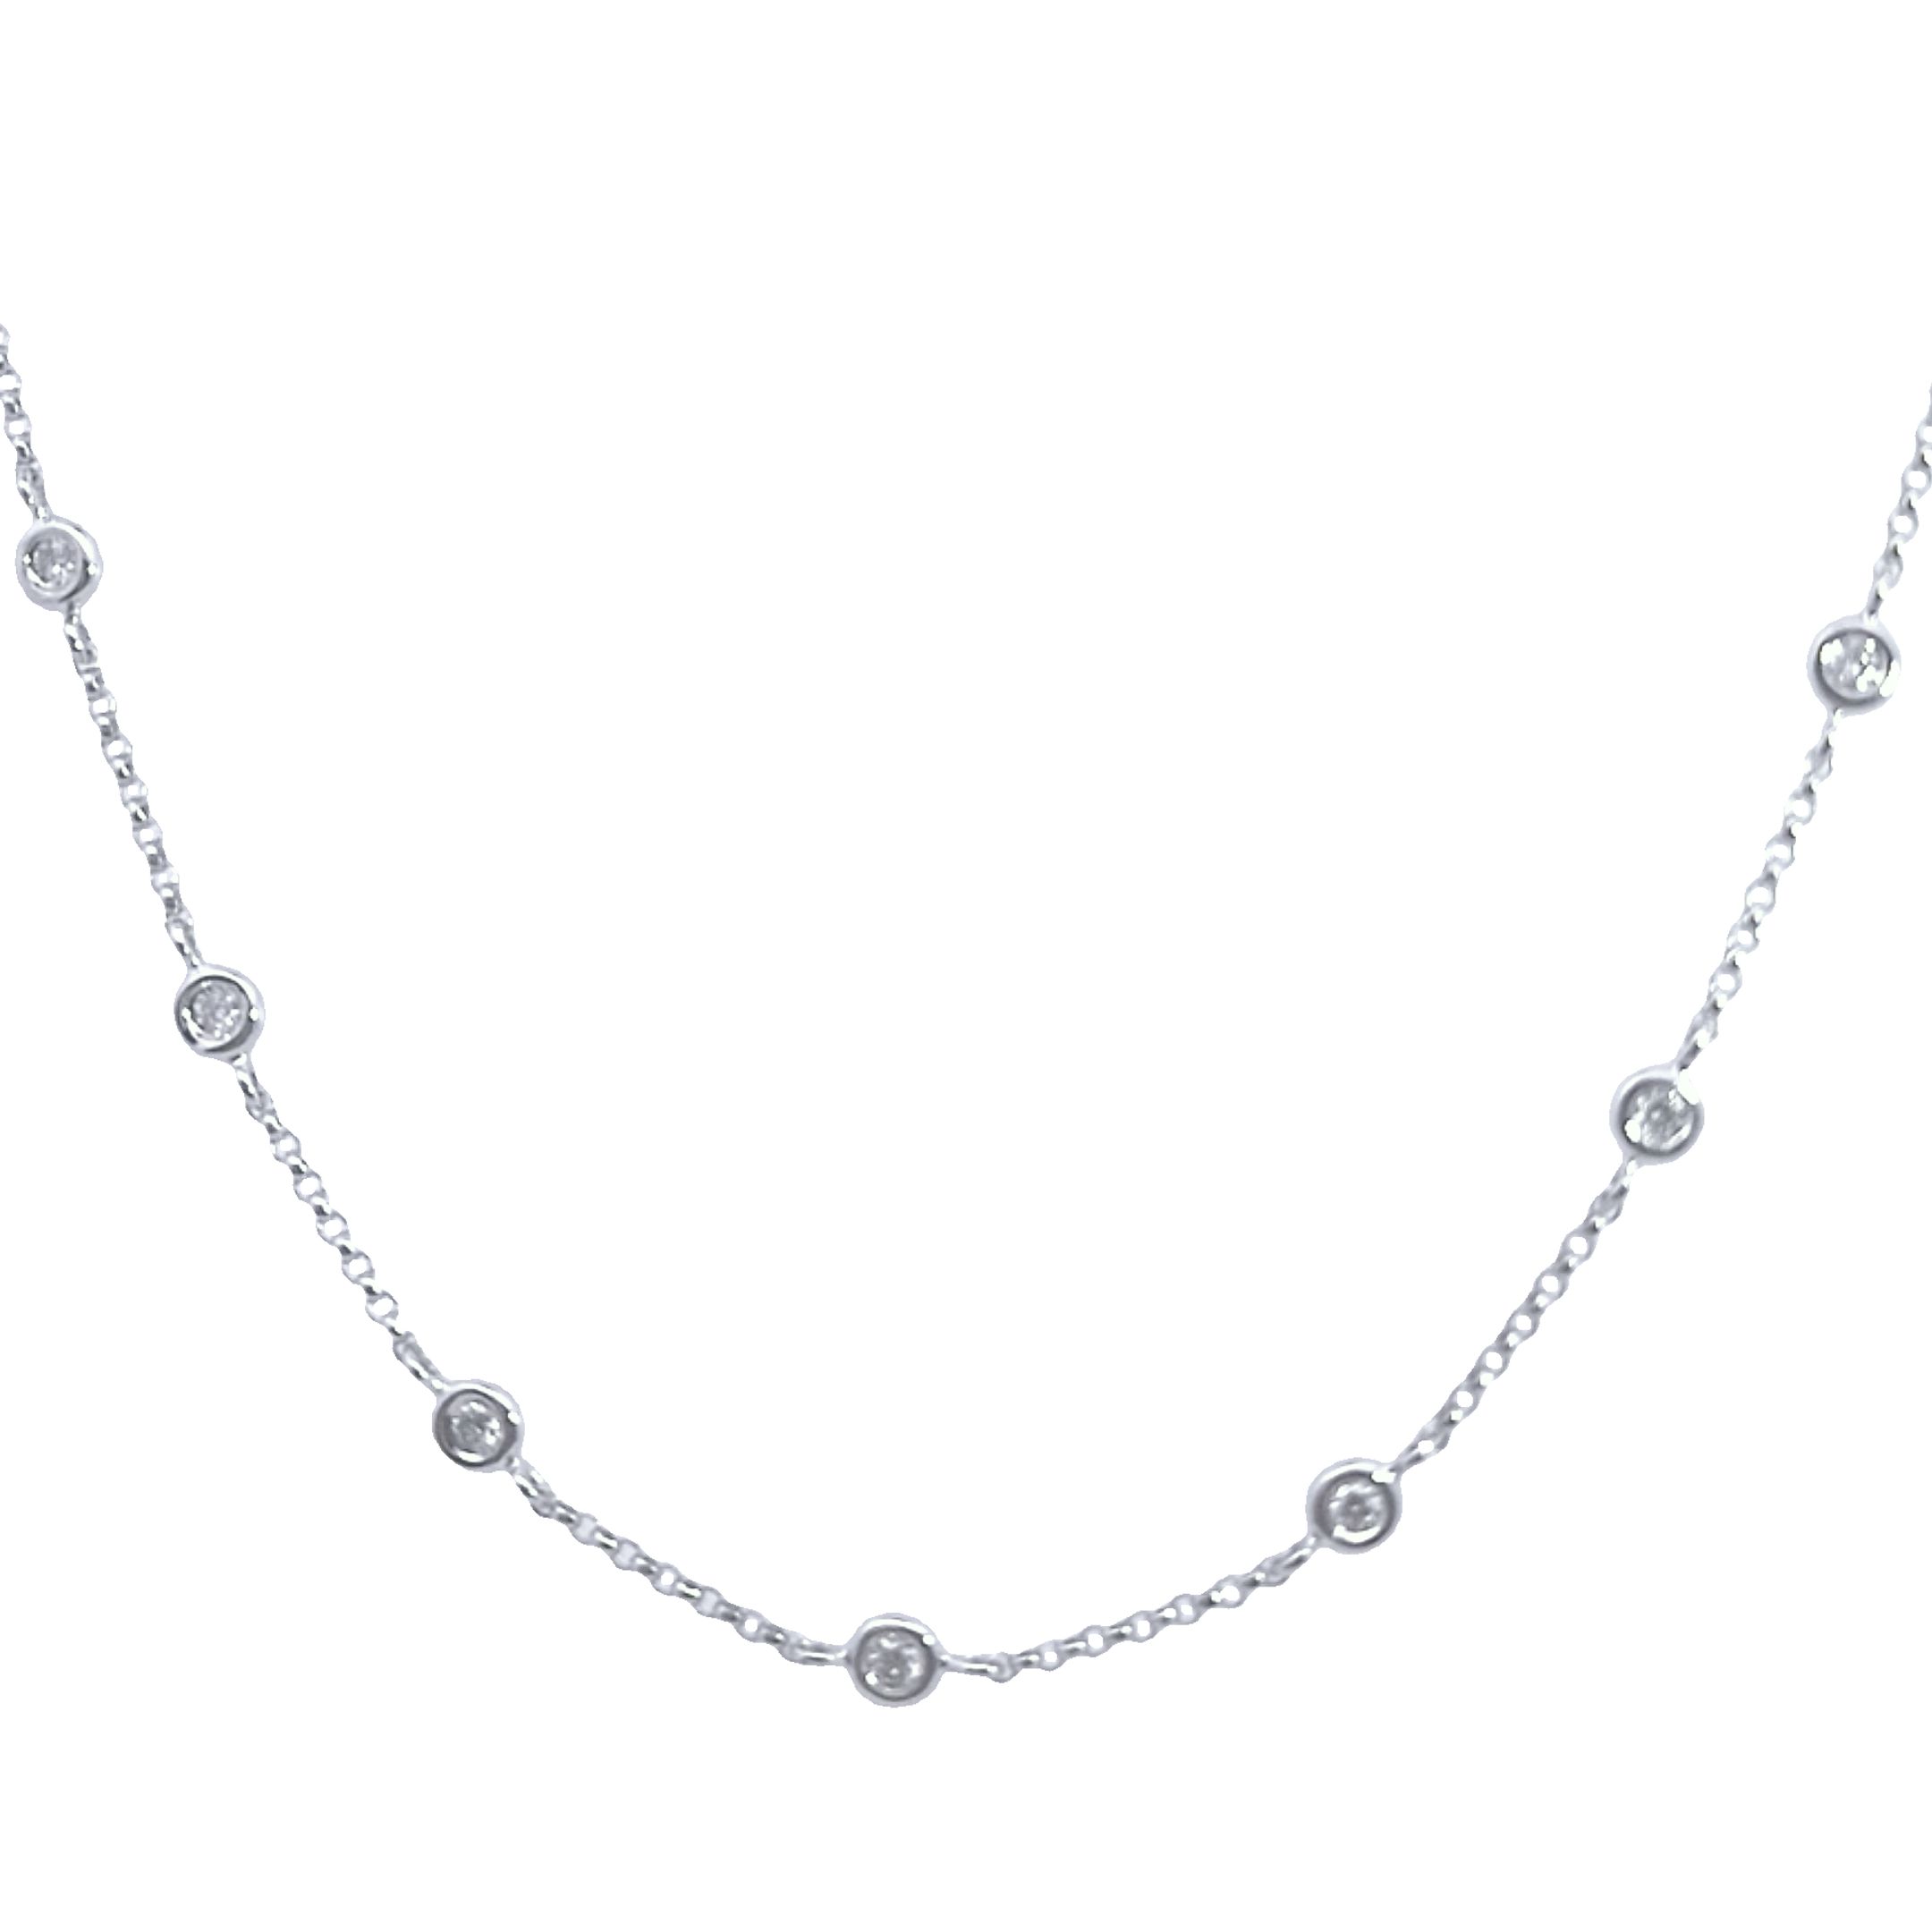 18 Carat White Gold and Diamond Necklace - 0.52 Carats